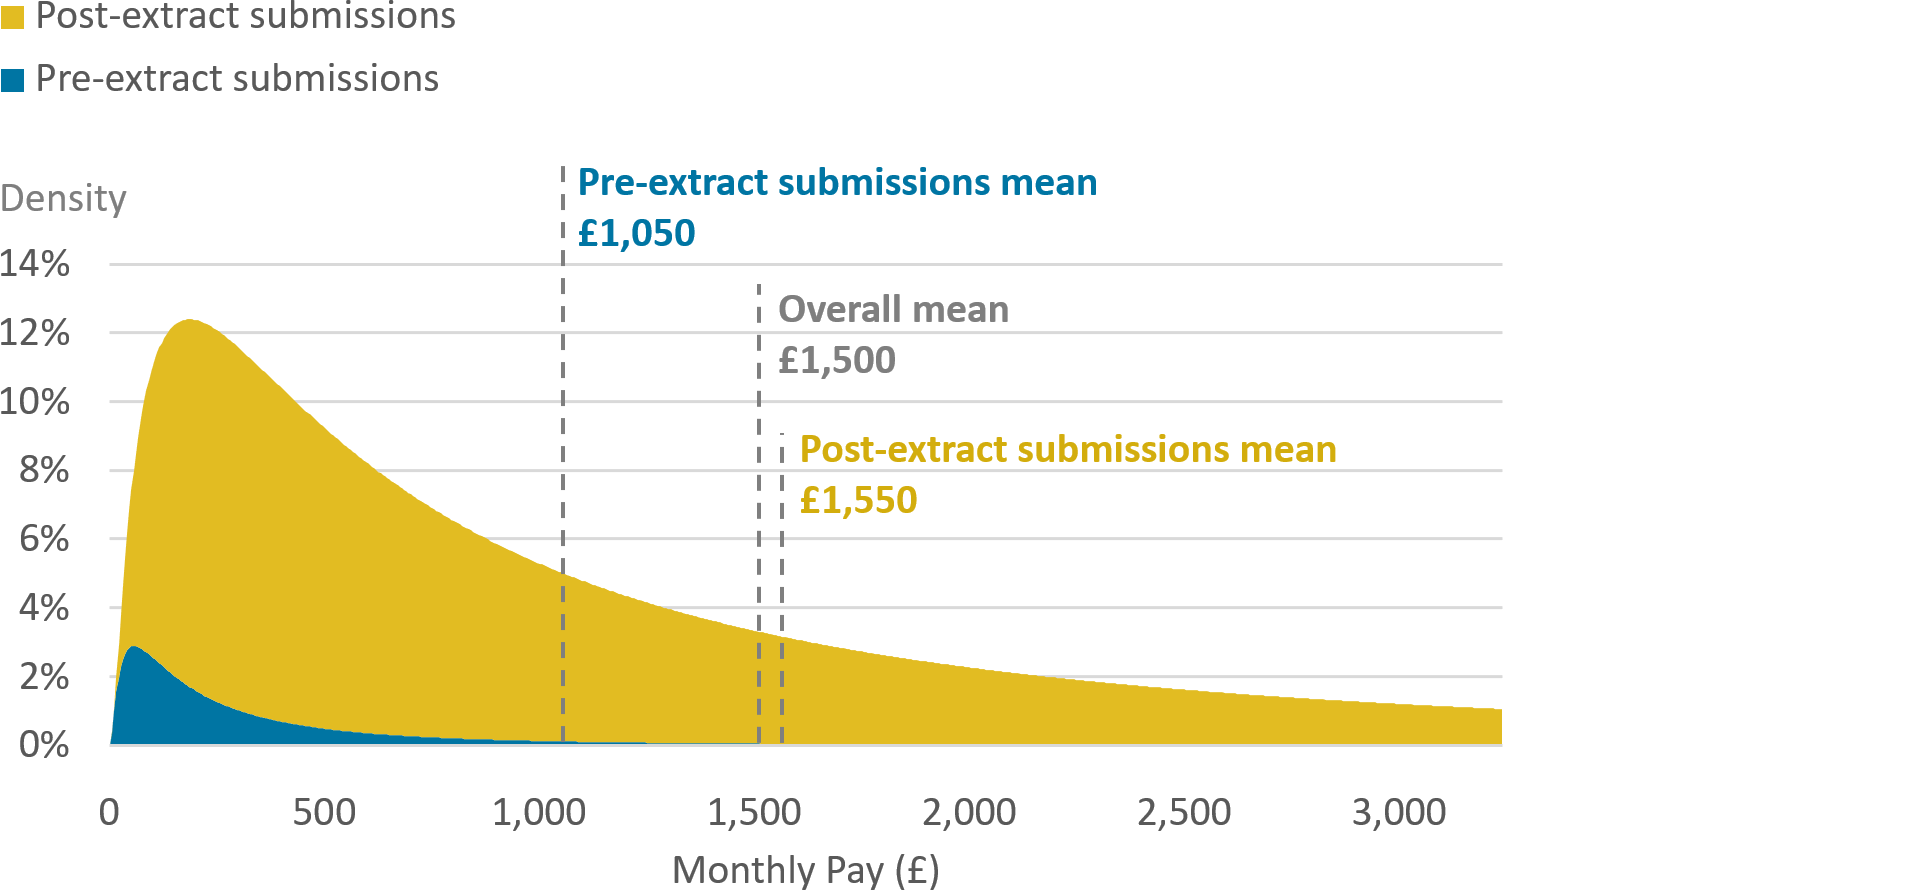 Example decomposition of the distribution of pay for new jobs, by whether the submission is early or not.